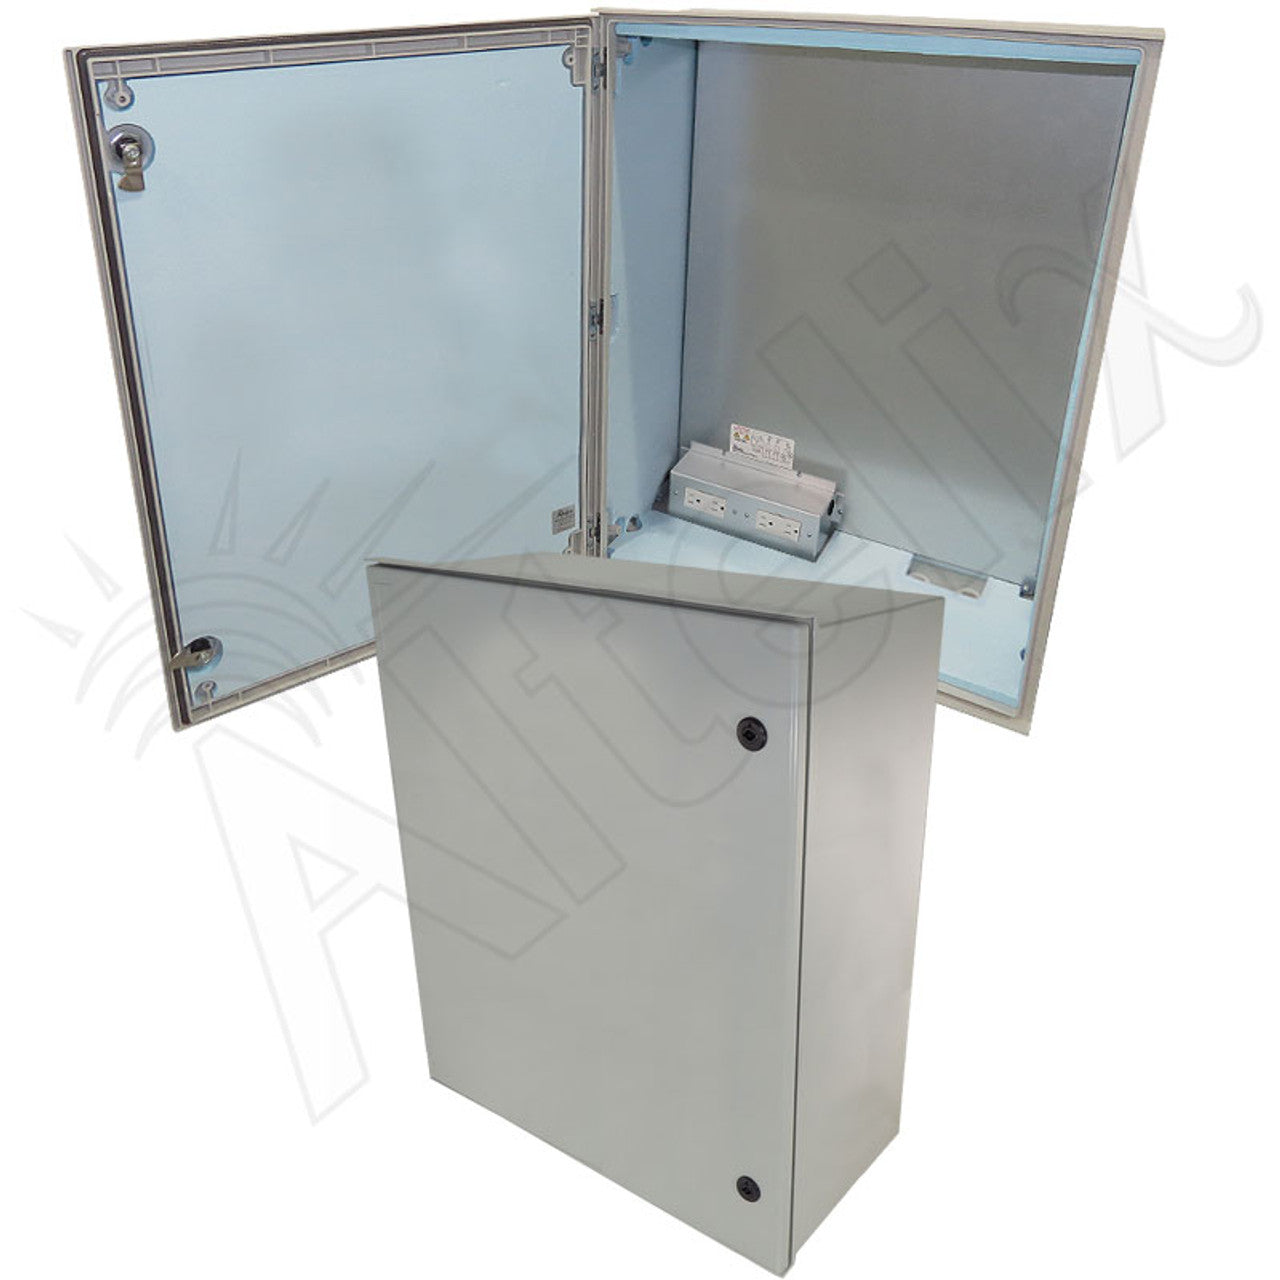 Altelix Insulated NEMA 4X Fiberglass Heated Weatherproof Enclosure with 200W Heater and 120 VAC Outlets-7